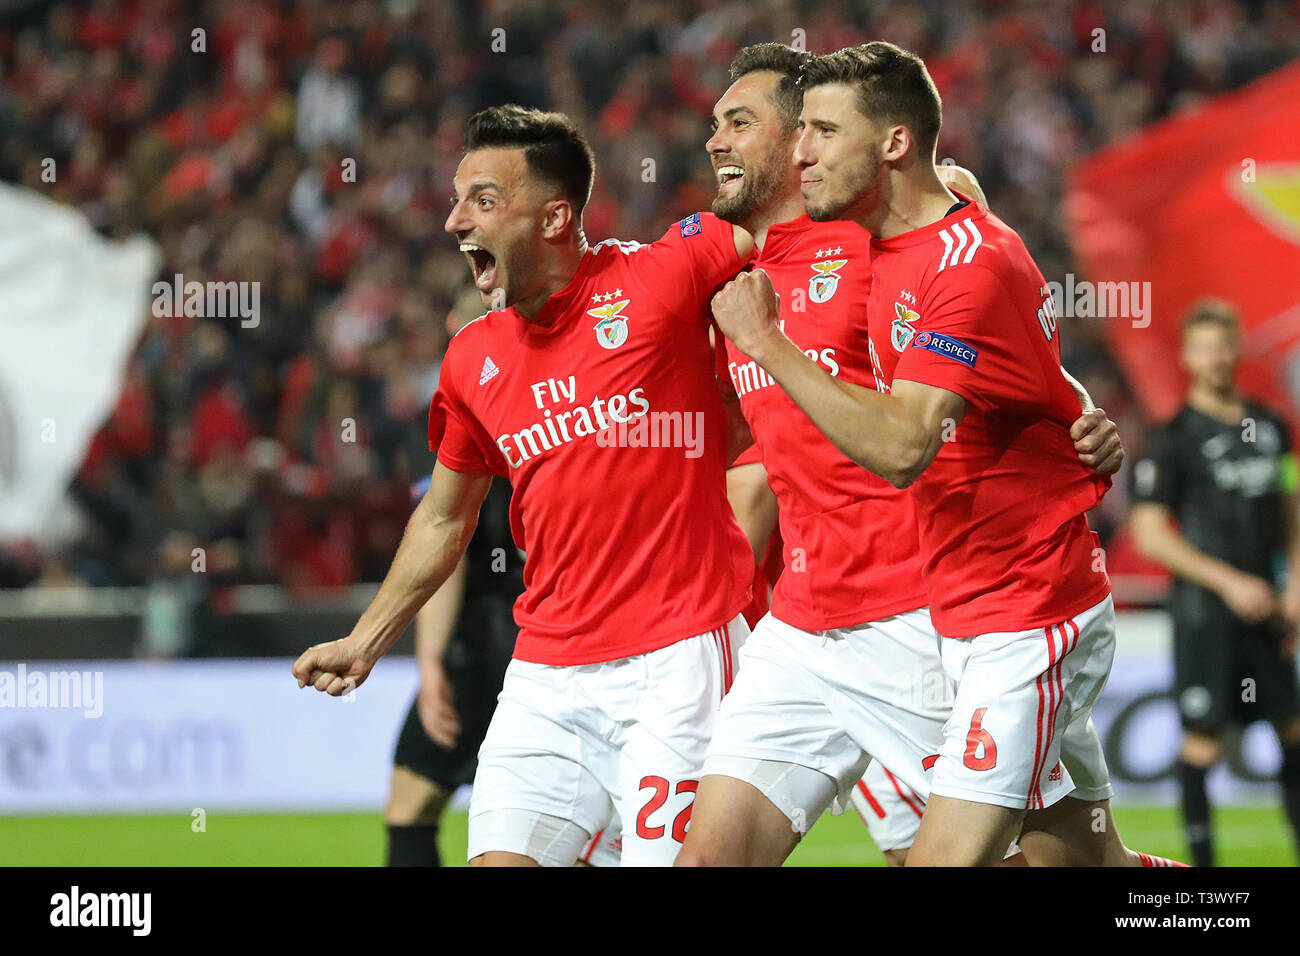 Rúben Dias of SL Benfica (R) celebrates his goal with Andreas Samaris of SL Benfica (L) and Jardel of SL Benfica (C) during the UEFA Europa League 2018/2019 football match between SL Benfica vs Eintracht Frankfurt.  (Final score: SL Benfica 4 - 2 Eintracht Frankfurt) Stock Photo